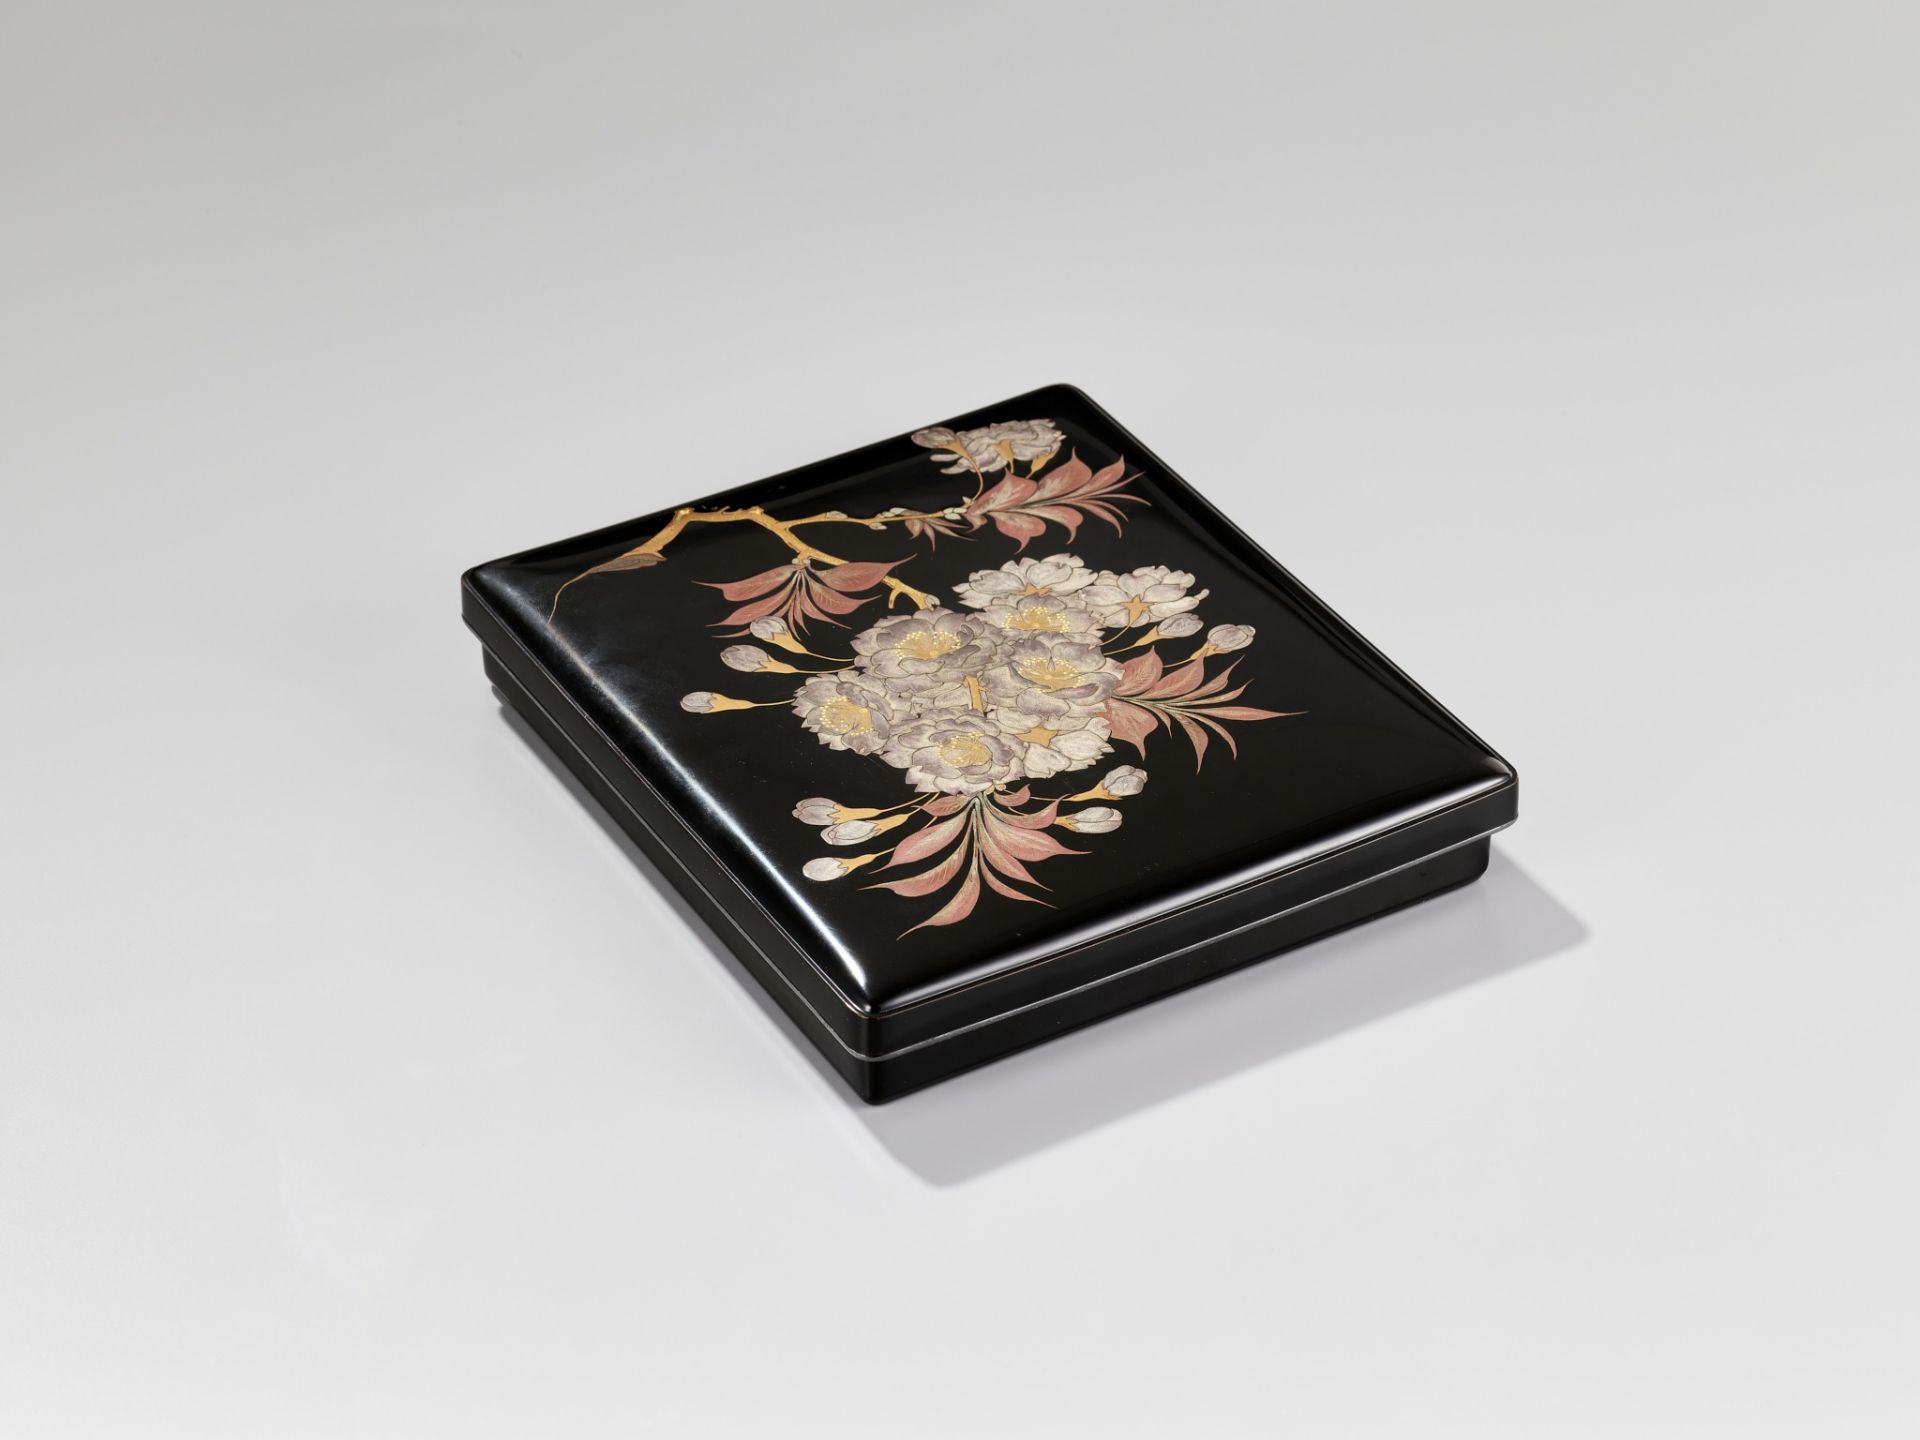 A LACQUER SUZURIBAKOO DEPICTING BLOSSOMING BELLFLOWERS (KIKYO) AND MAPLE LEAVES - Image 7 of 9